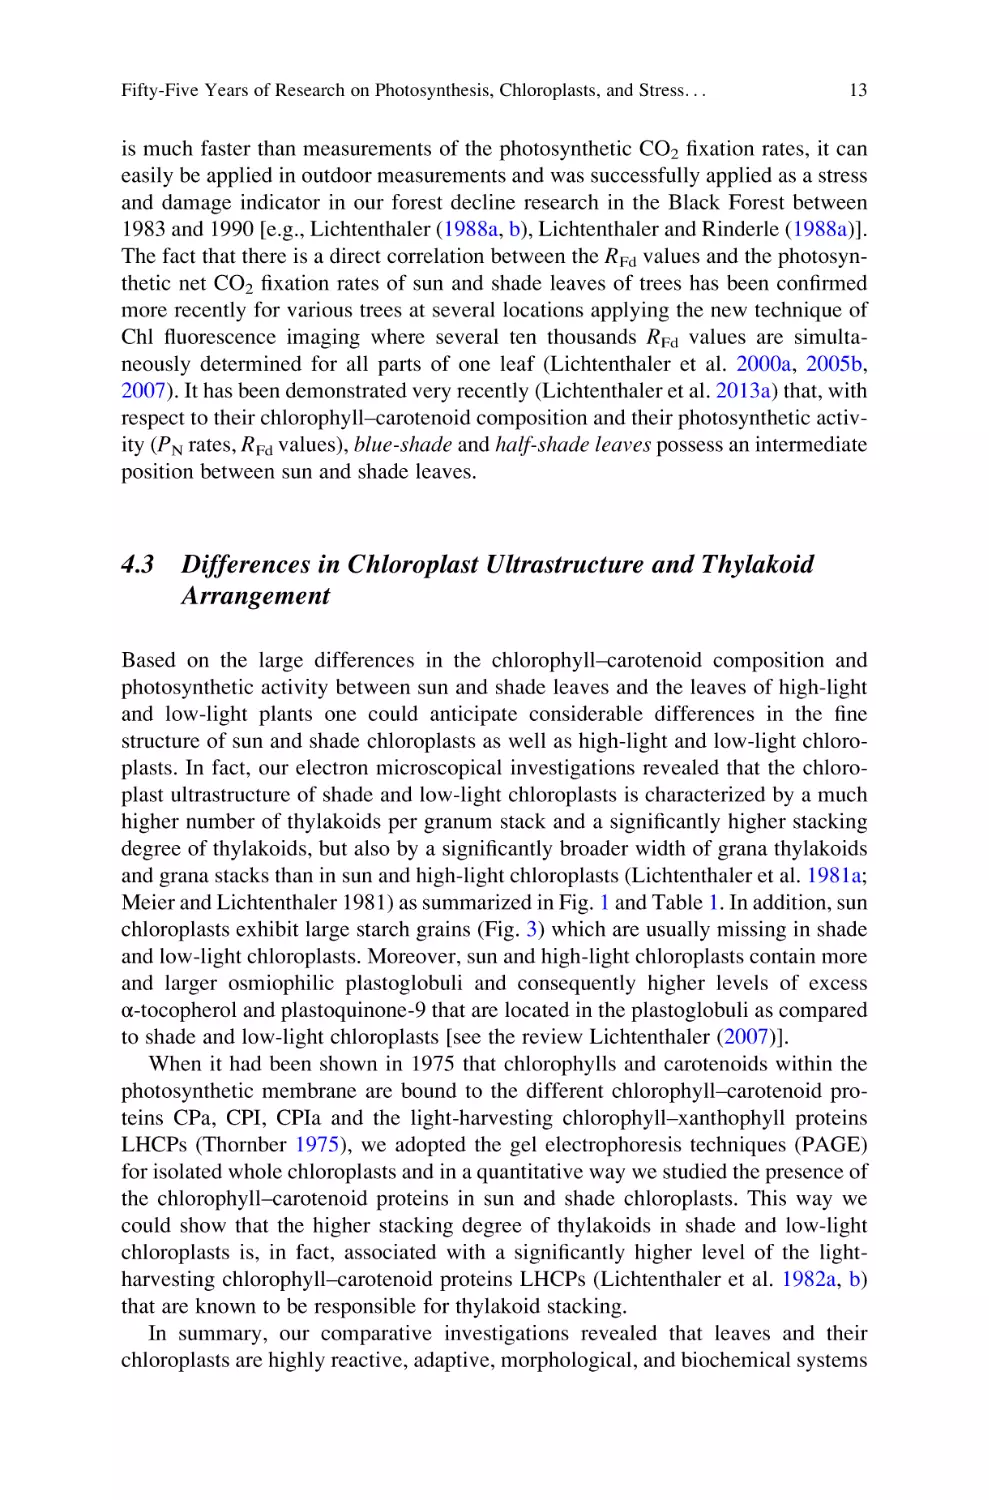 4.3 Differences in Chloroplast Ultrastructure and Thylakoid Arrangement